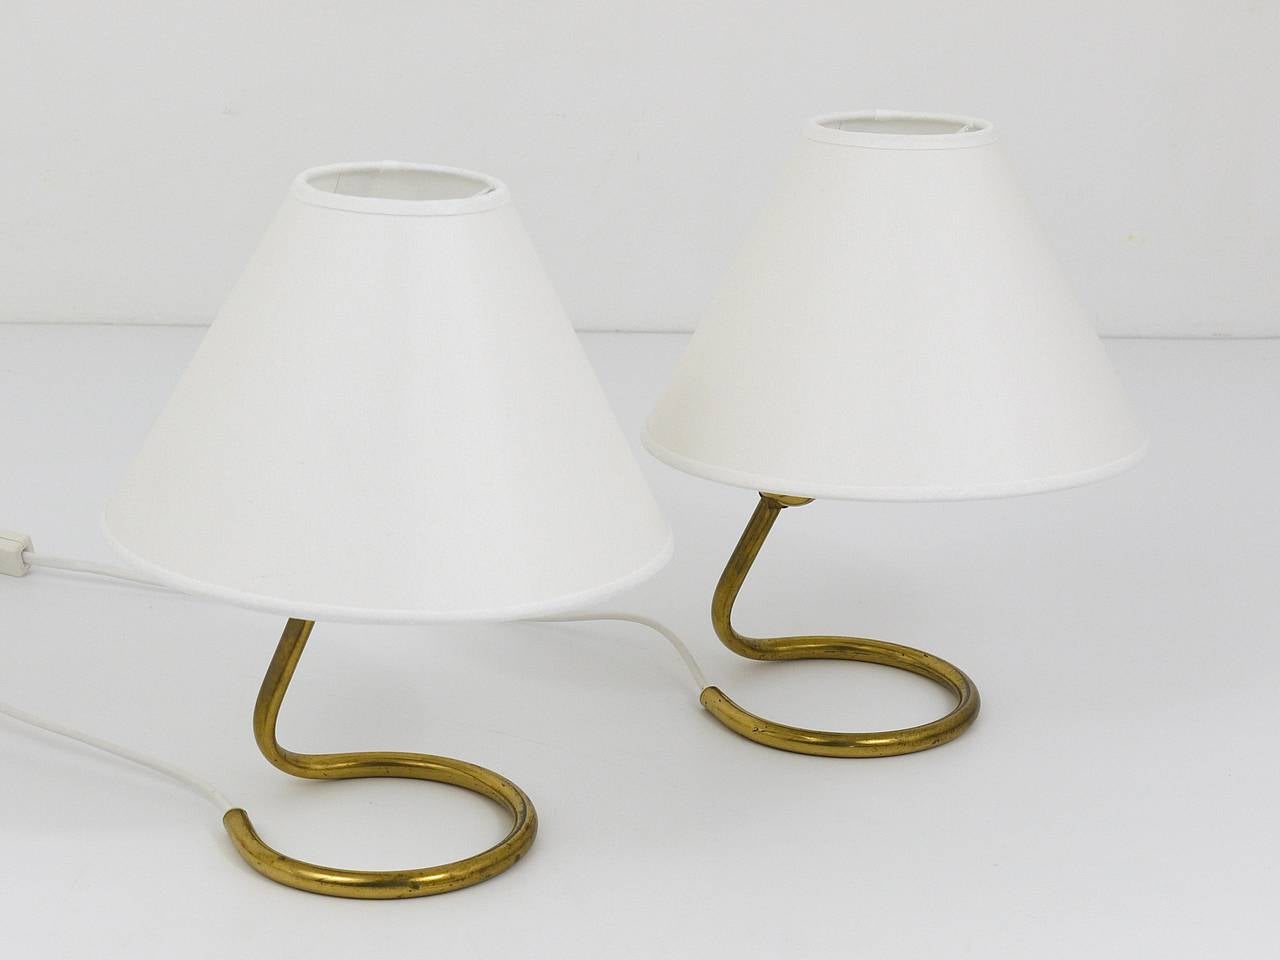 A beautiful pair of Austrian table lights, executed by Kalmar Vienna in the 1950s. Brass bases with white cone lampshades. In very good condition, nice patina on the brass. A very charming pair of lights.